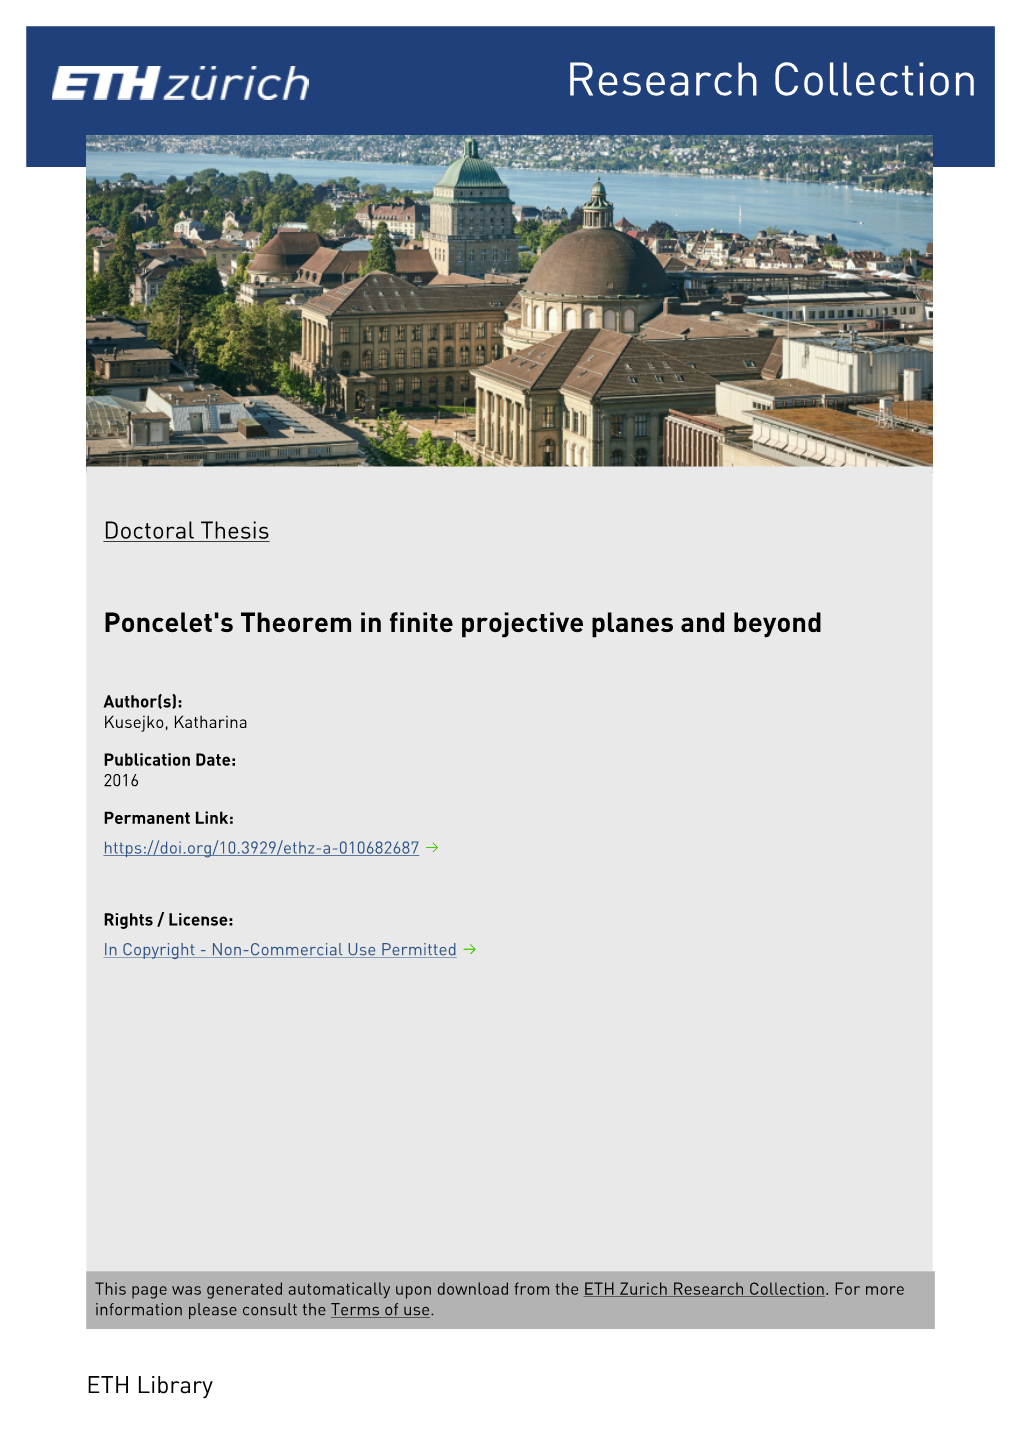 Poncelet's Theorem in Finite Projective Planes and Beyond